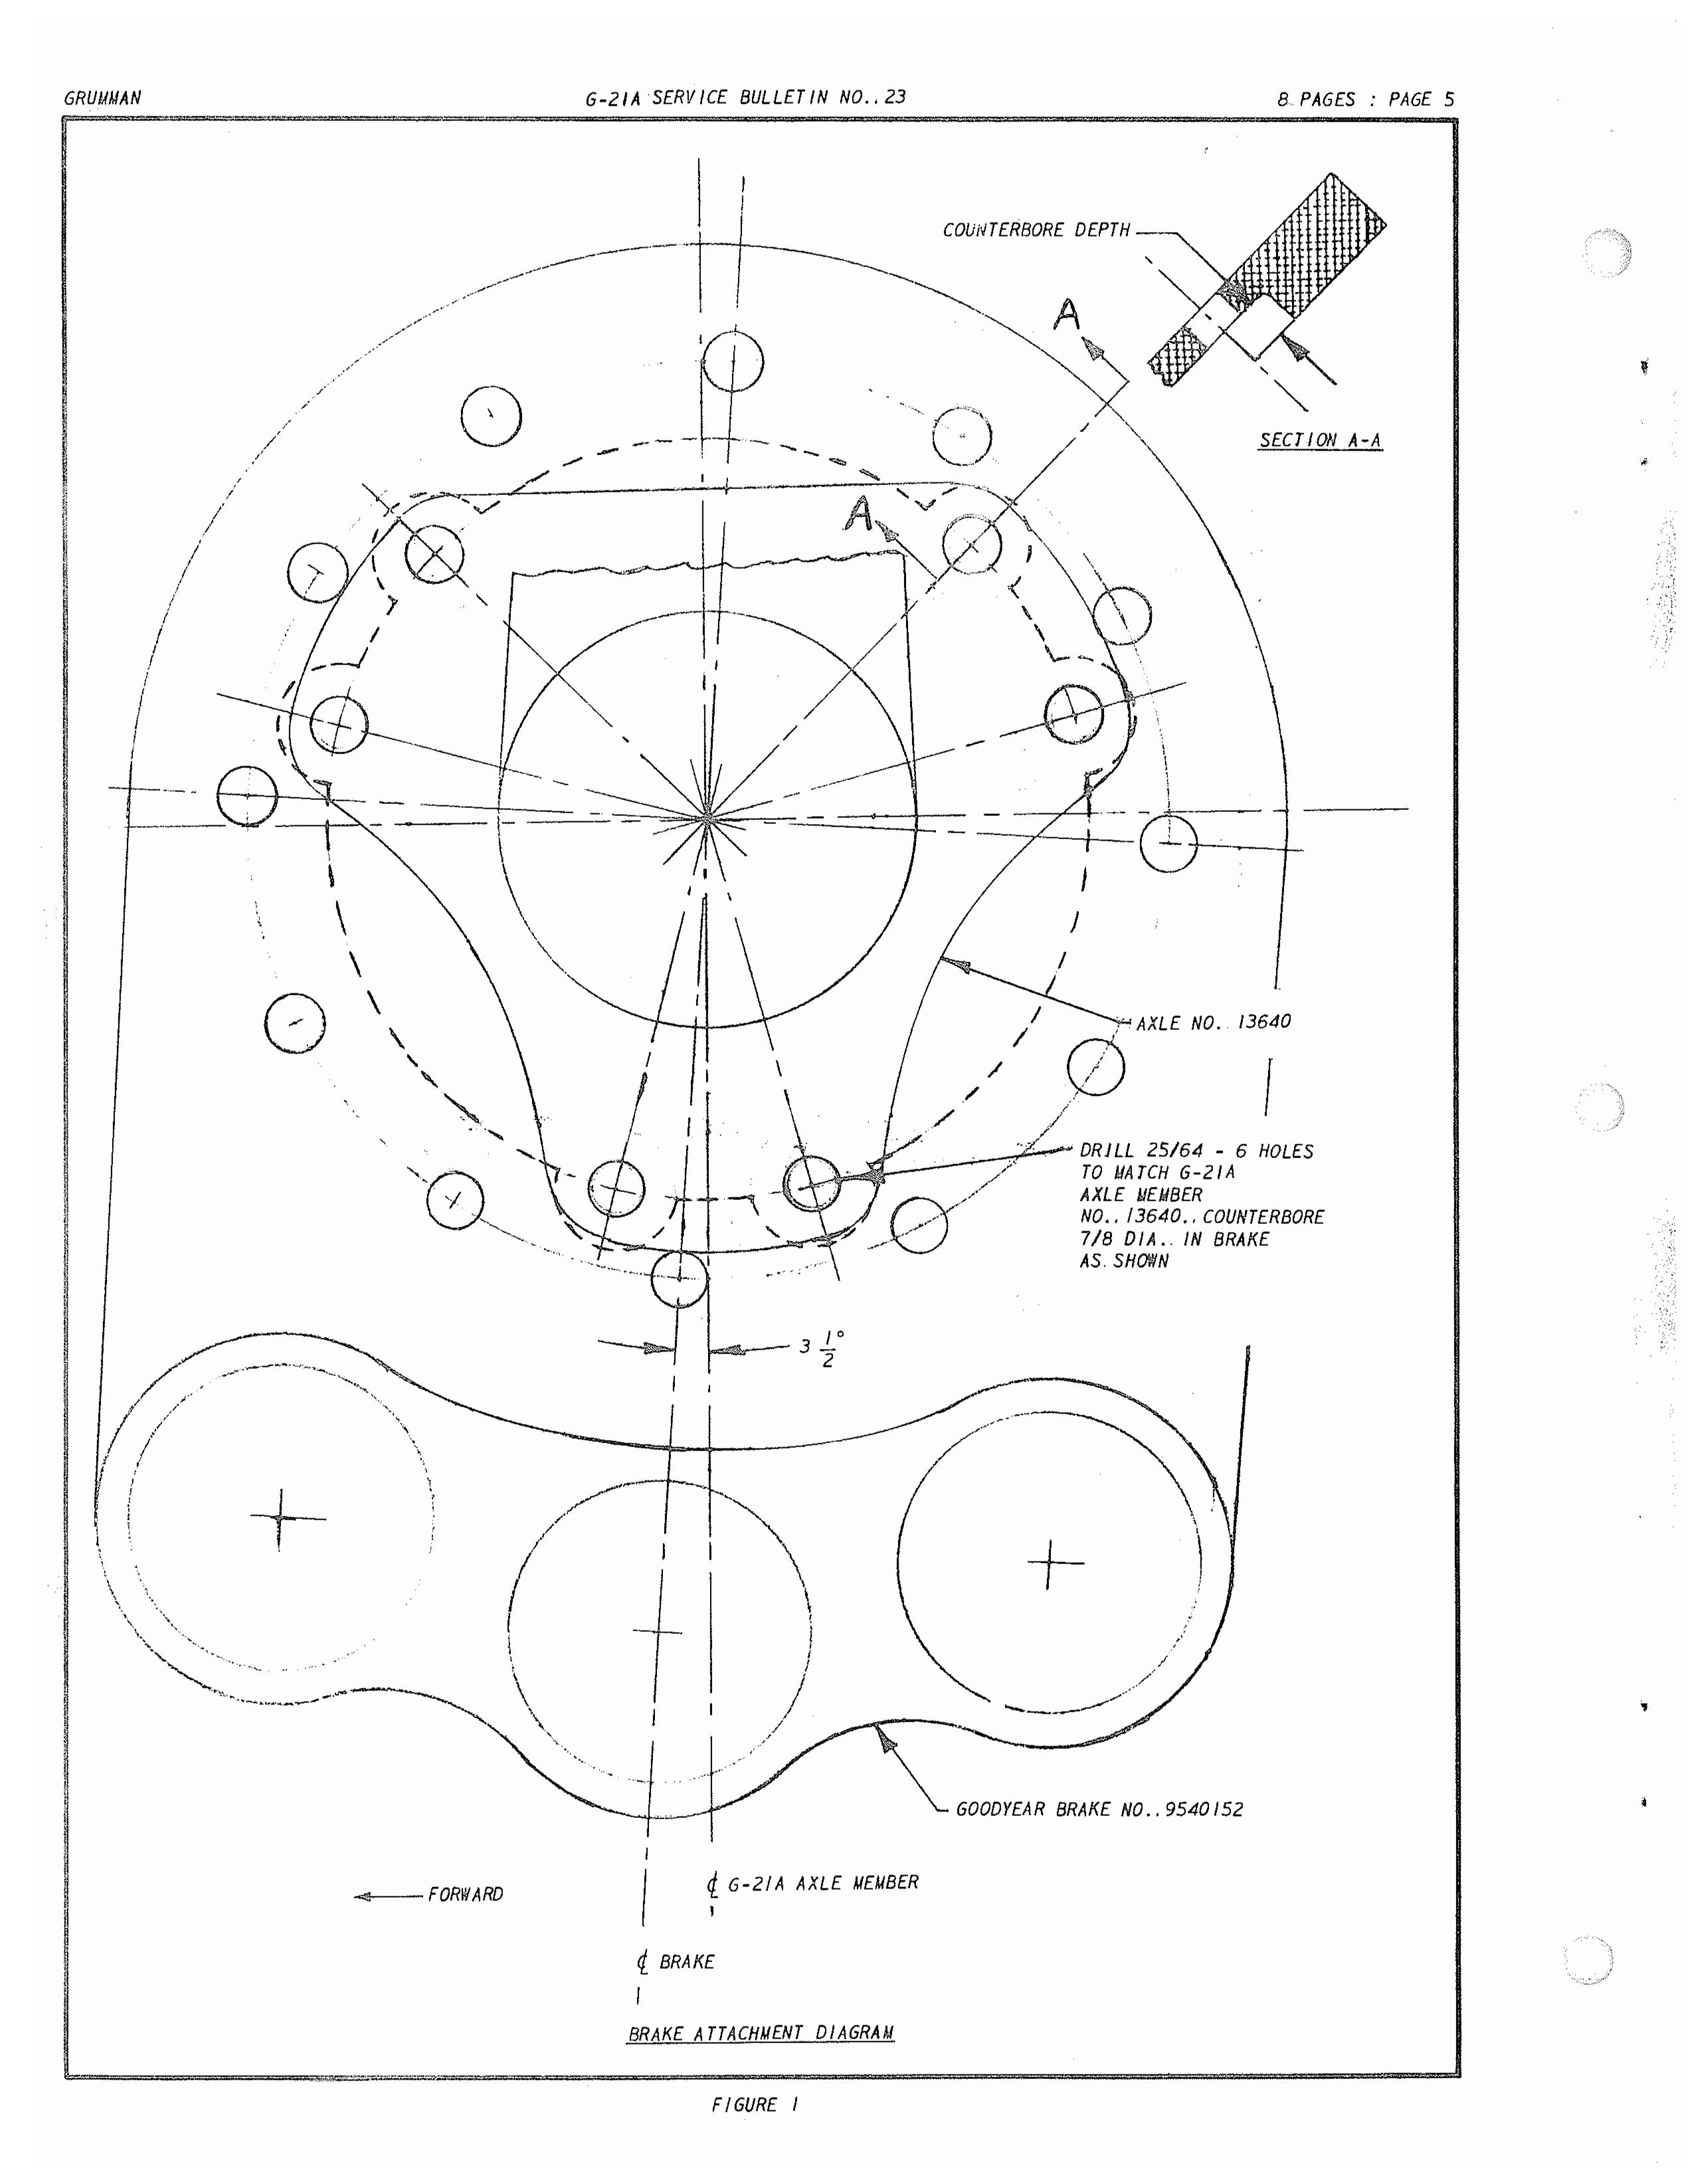 Sample page 6 from AirCorps Library document: Installation of Landing Gear and Brakes for G-21A